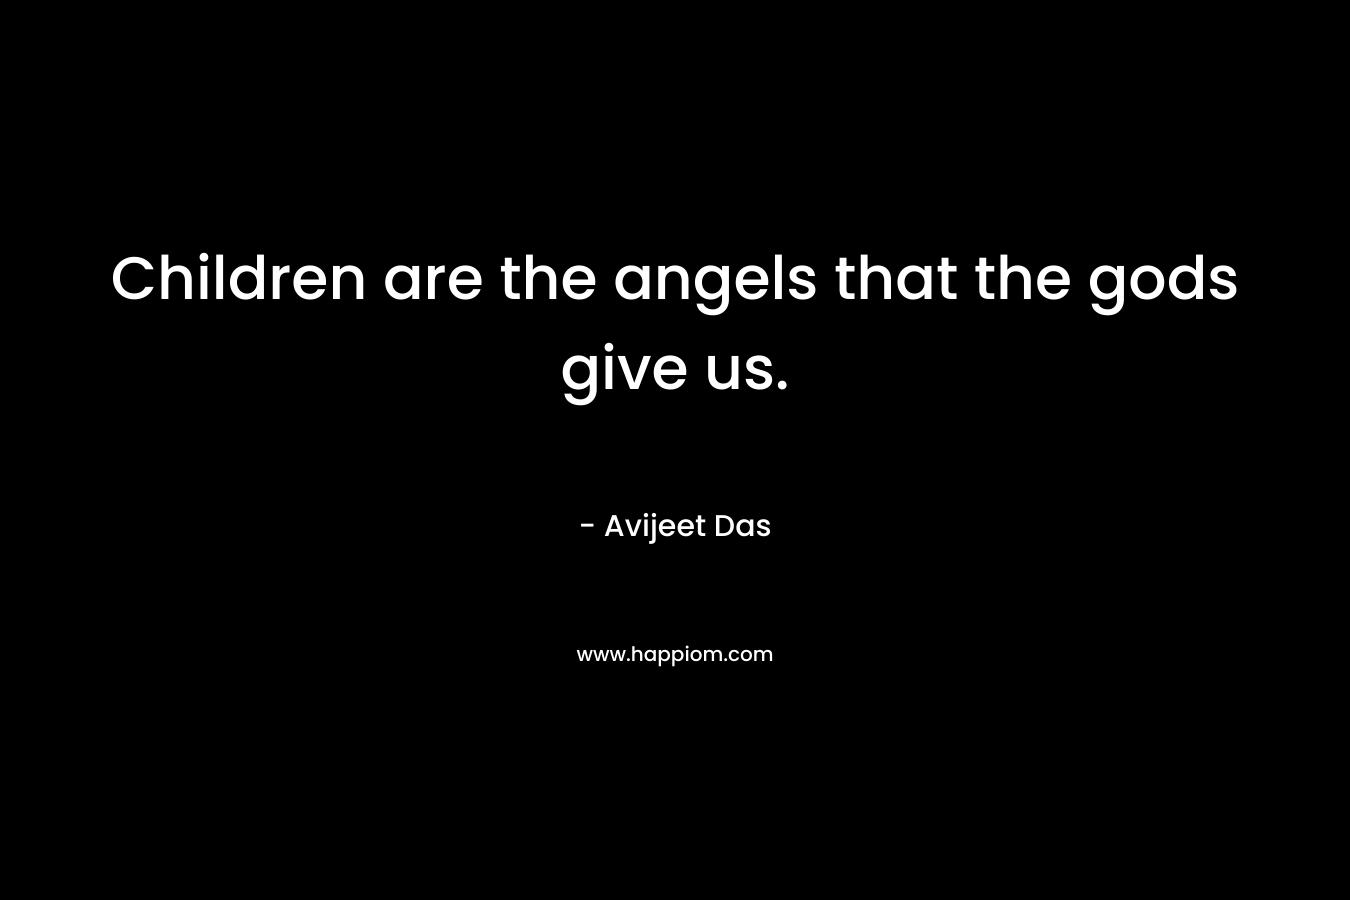 Children are the angels that the gods give us.